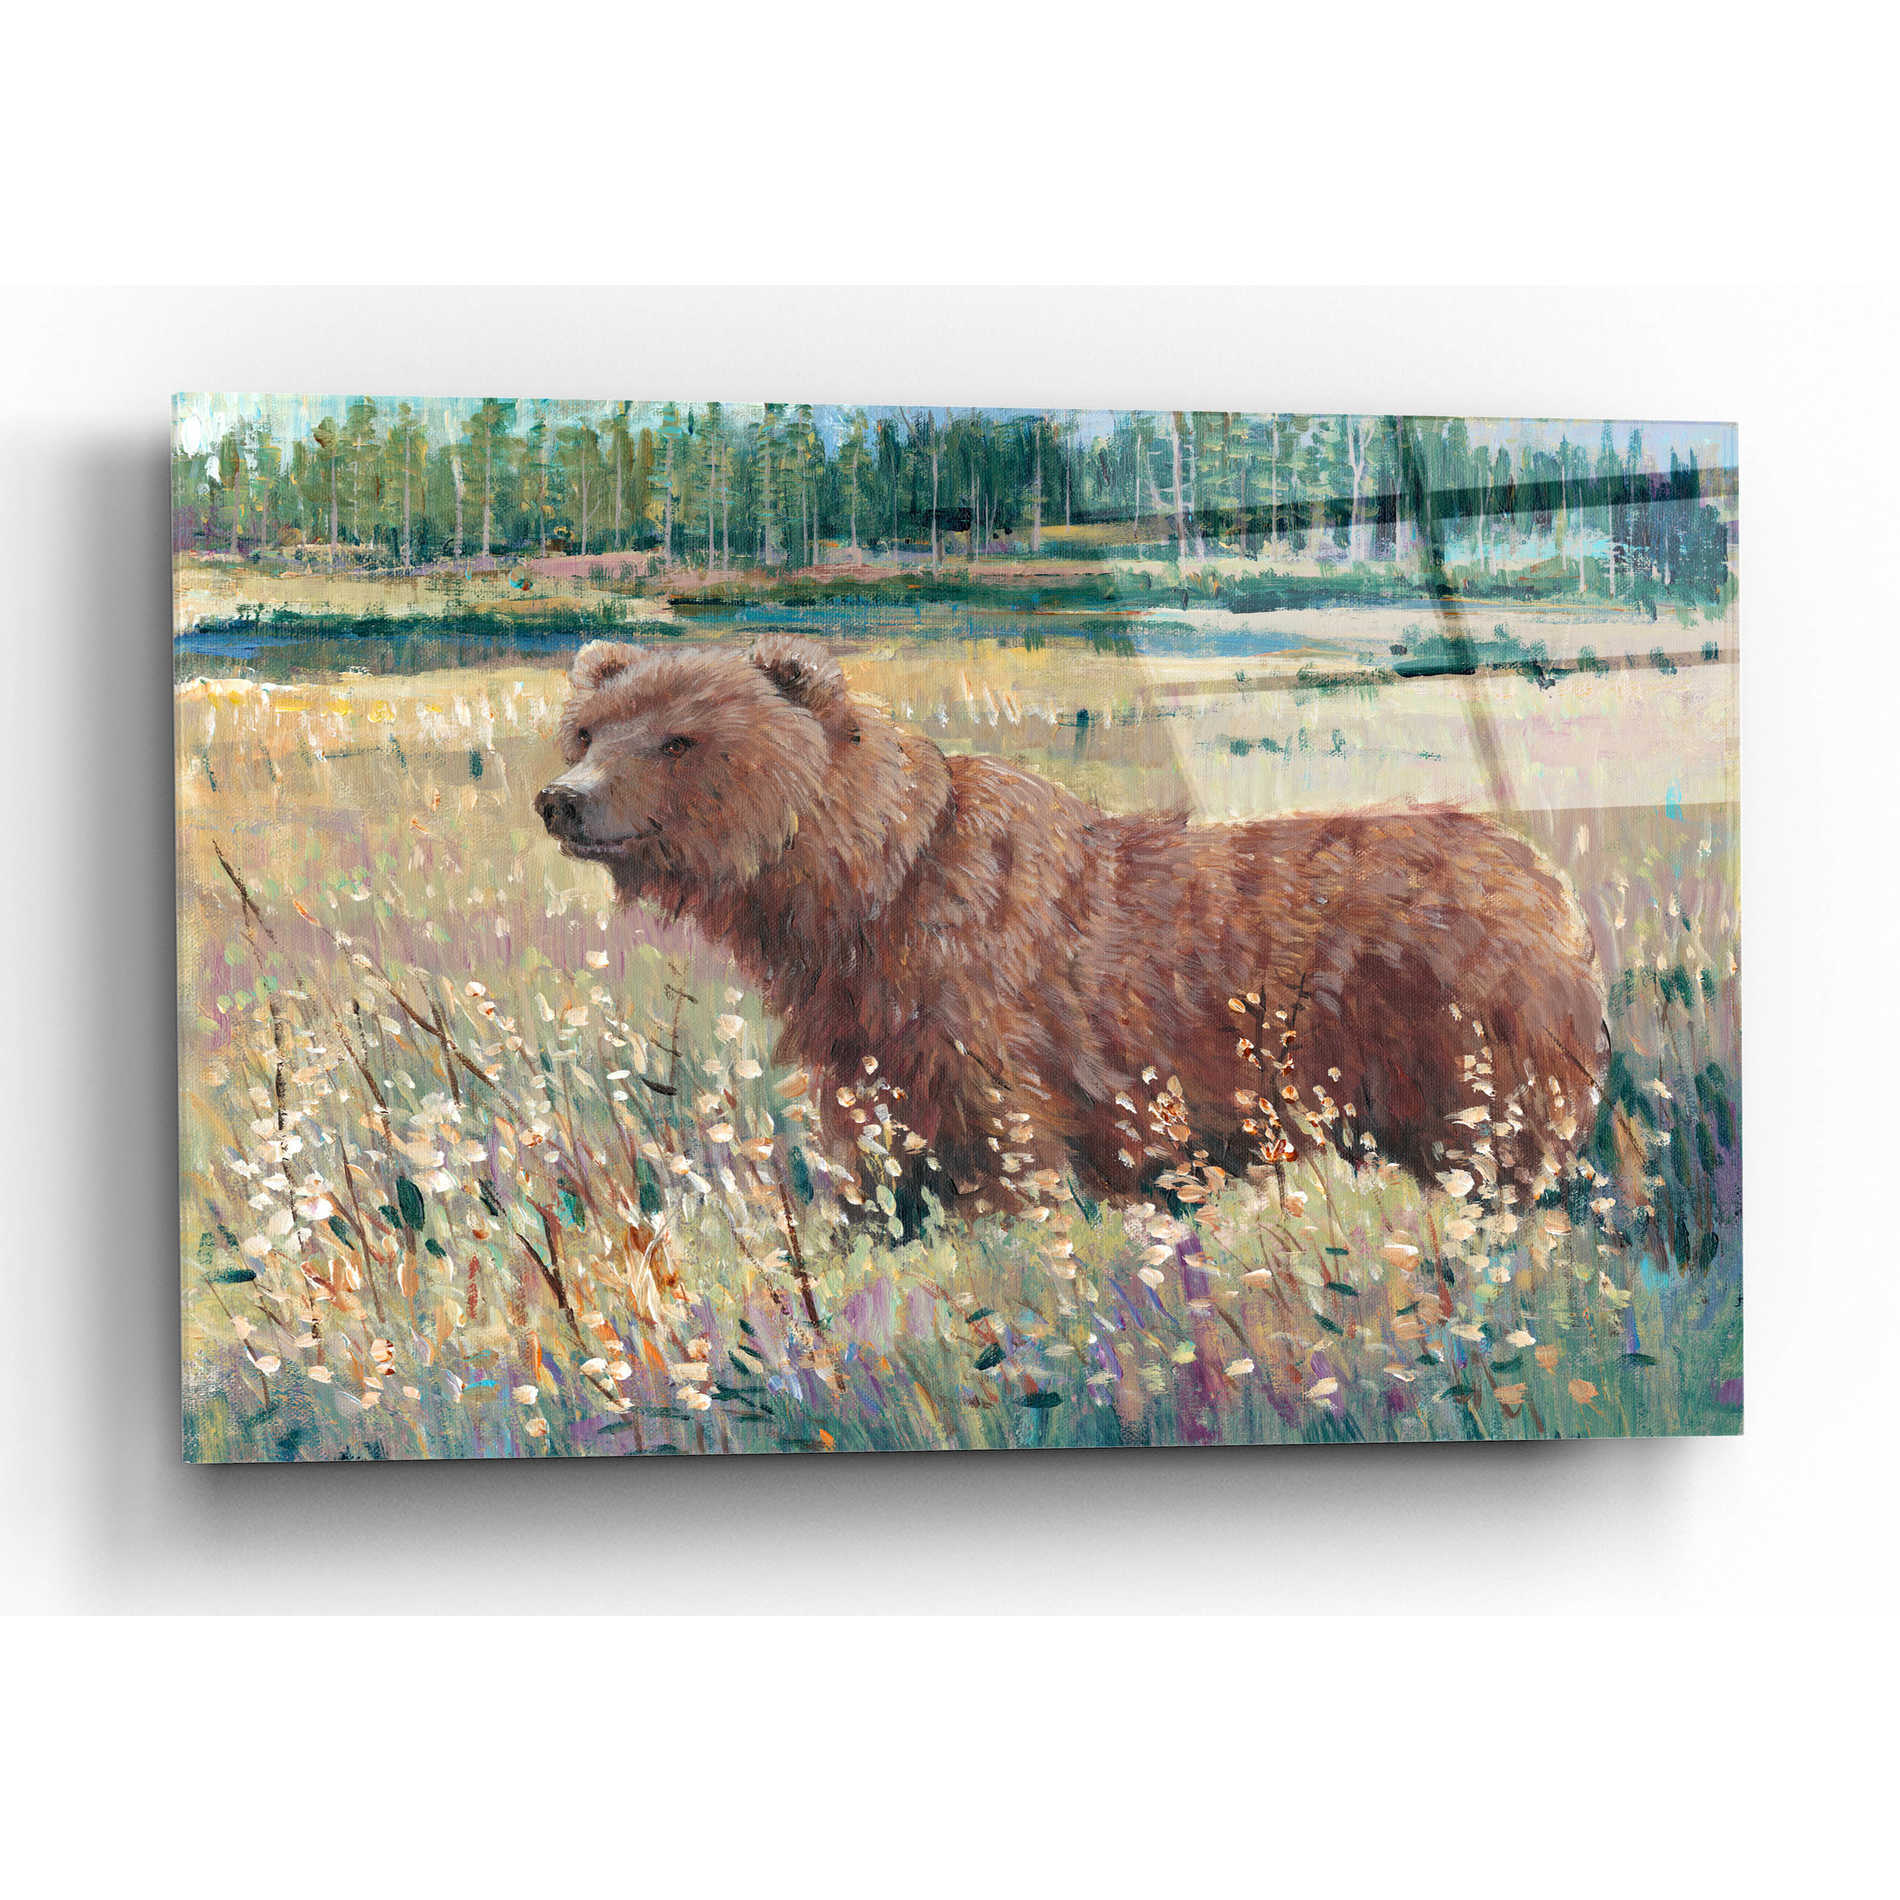 Epic Art 'Bear in the Field' by Tim O'Toole, Acrylic Glass Wall Art,24x16